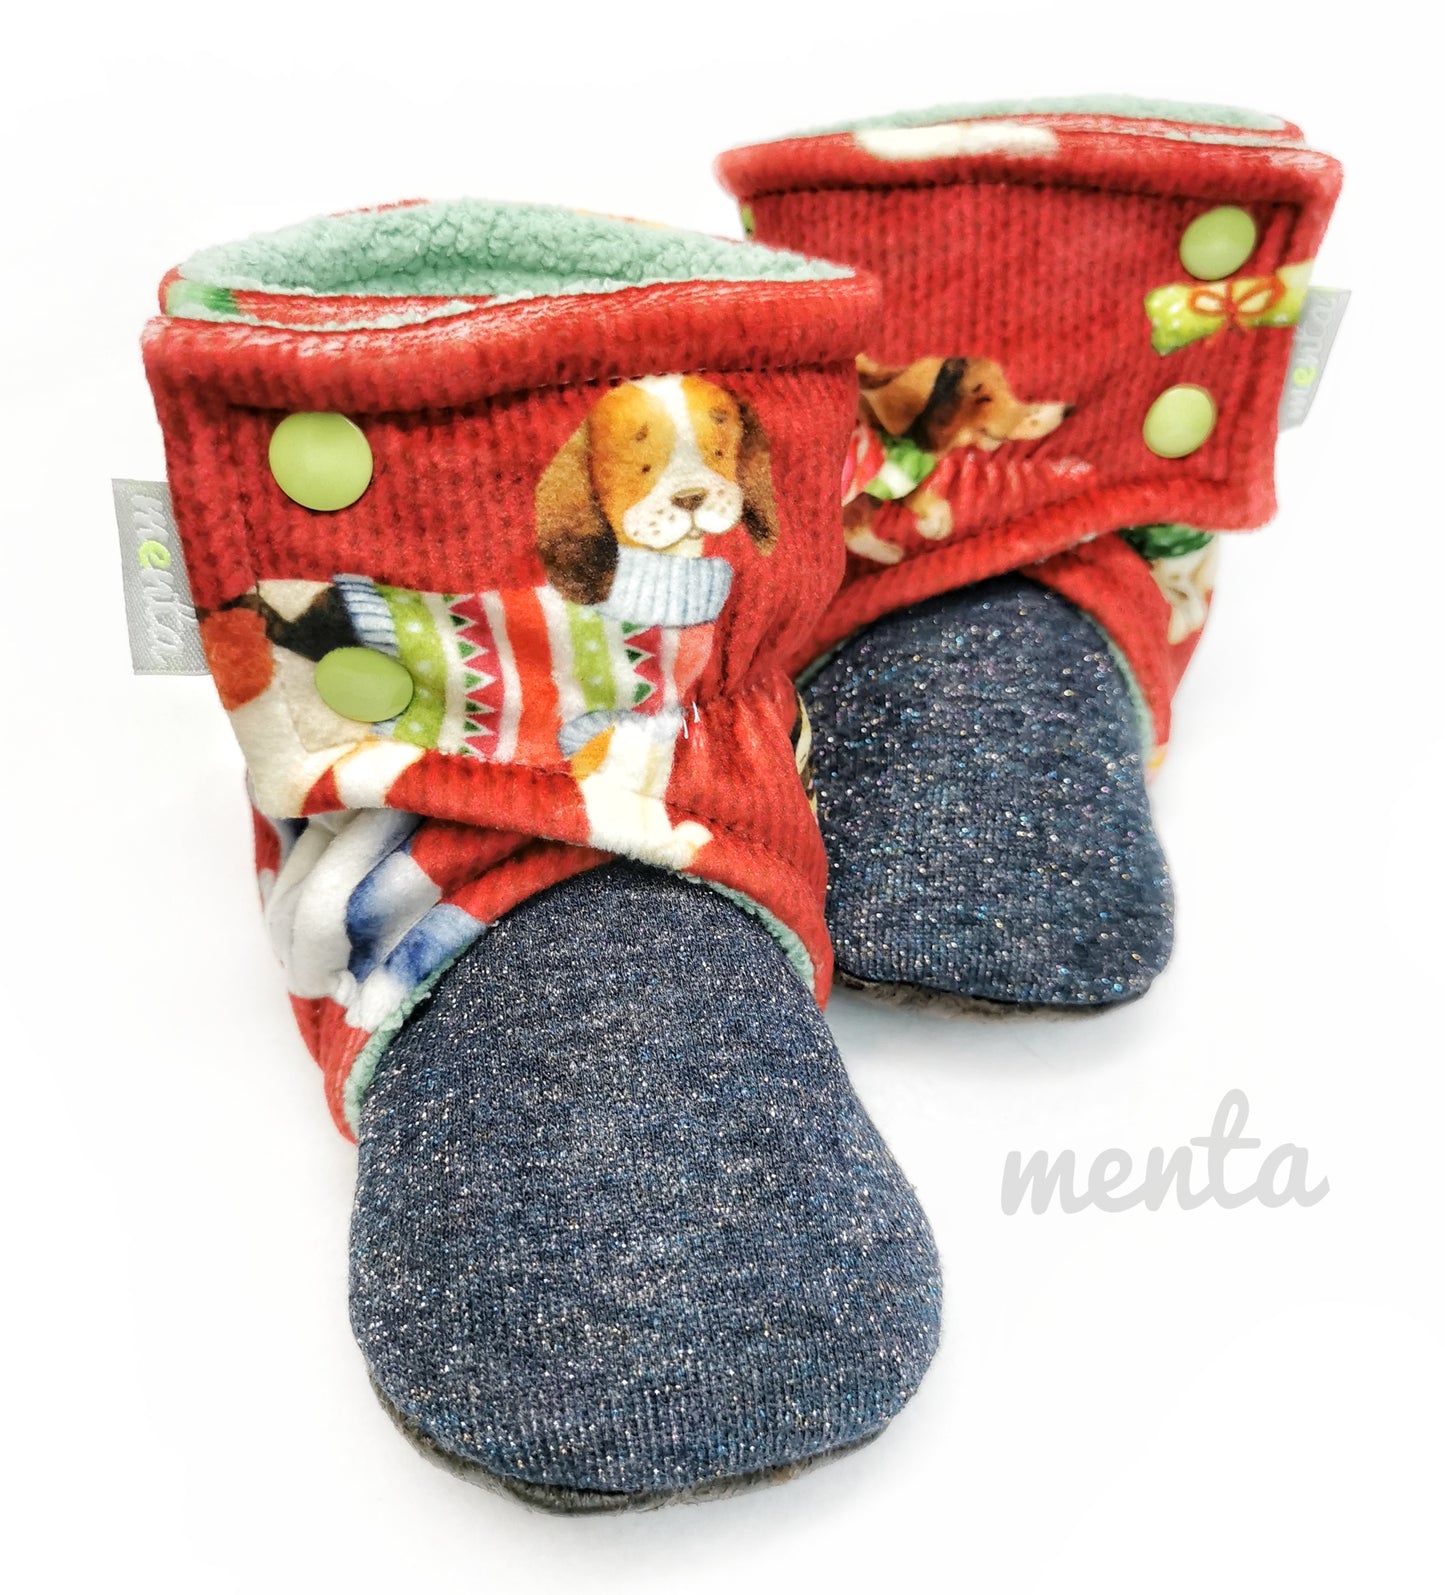 Wrap Booties Baby sizes